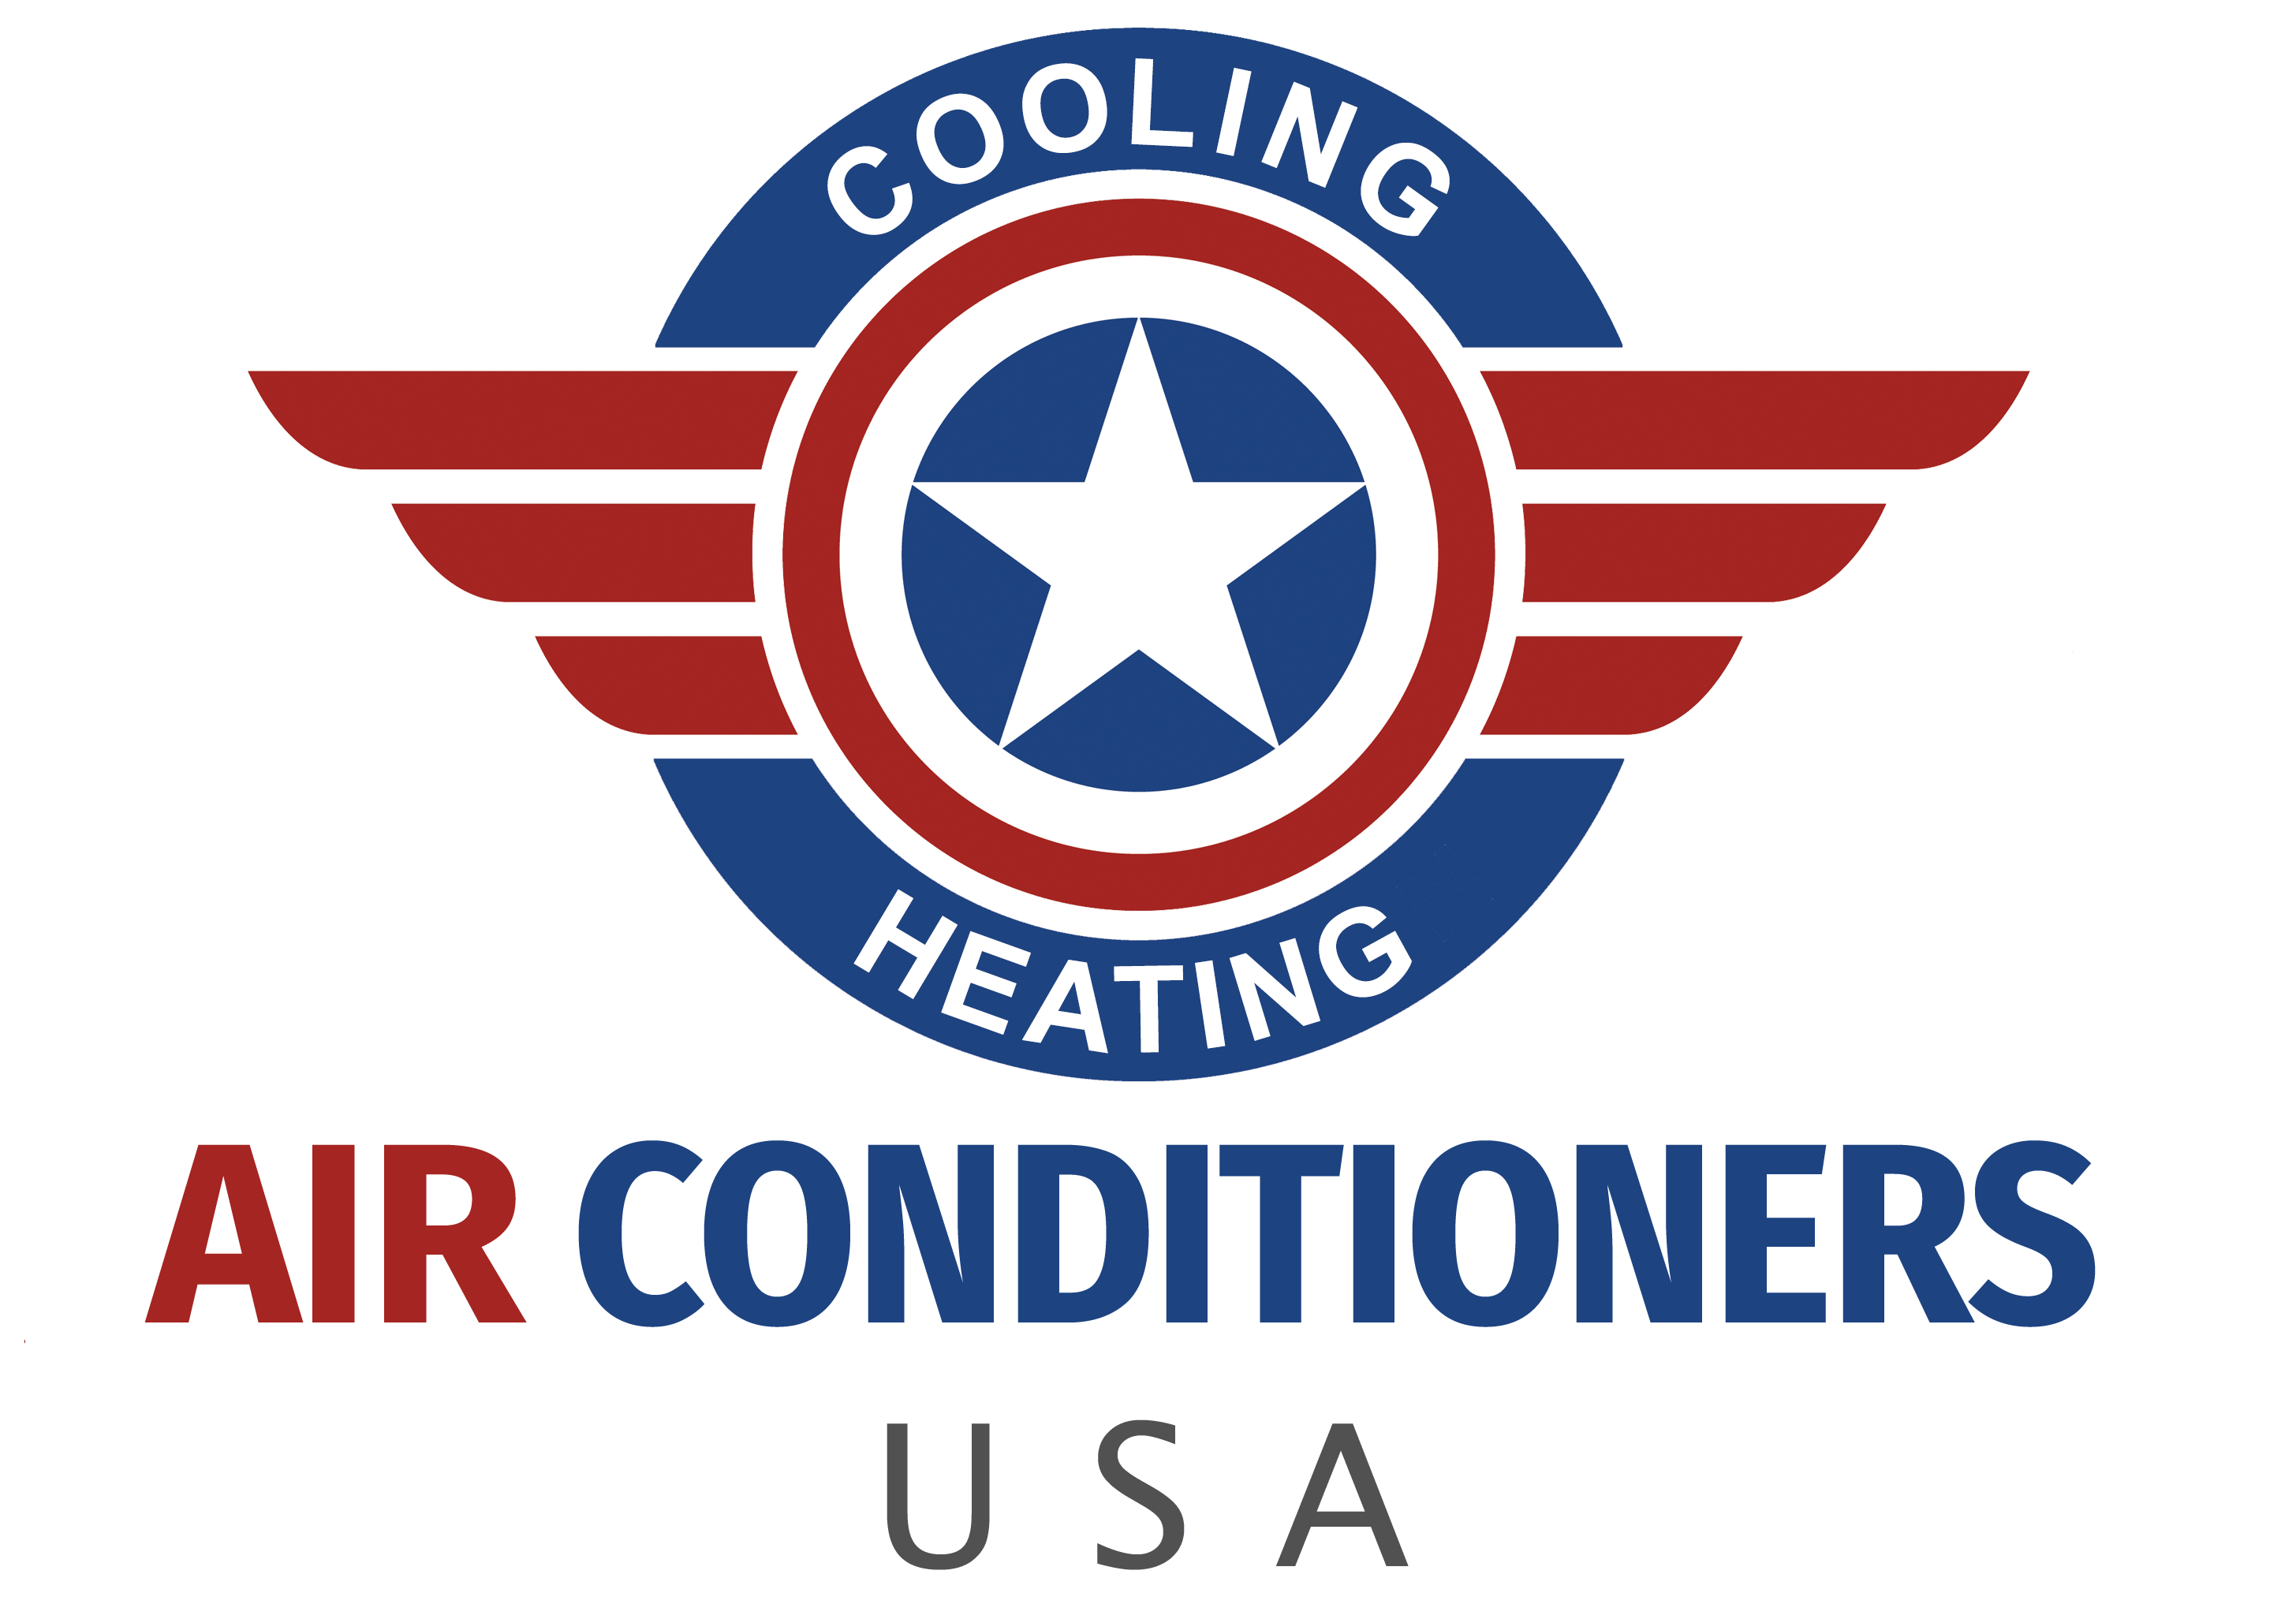 Air Conditioners USA